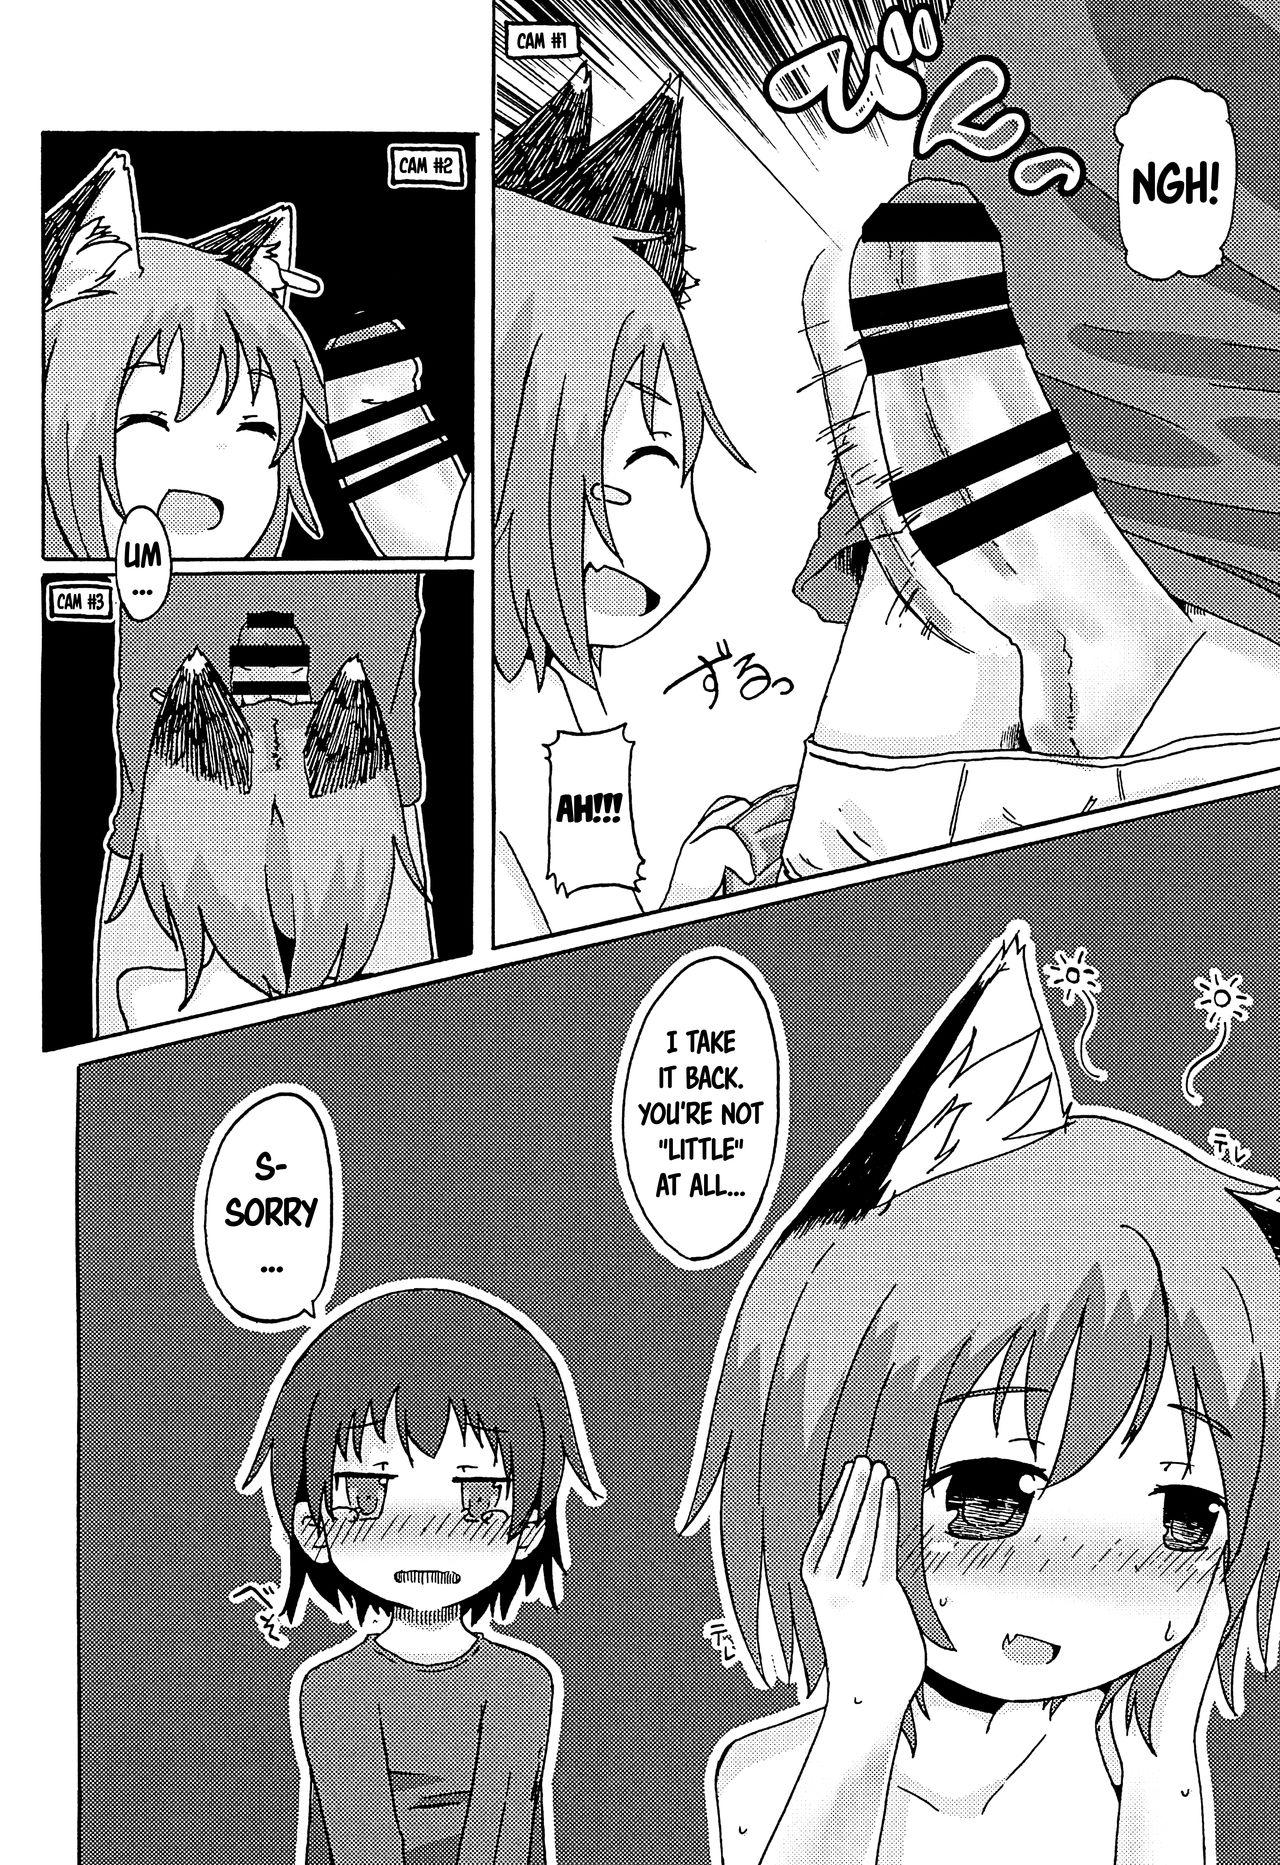 Missionary Position Porn Kyoudai de Tomodachi de Koibito na Boku to Neko | Siblings, Friends, Lovers: My life with a cat - Touhou project Casa - Page 11